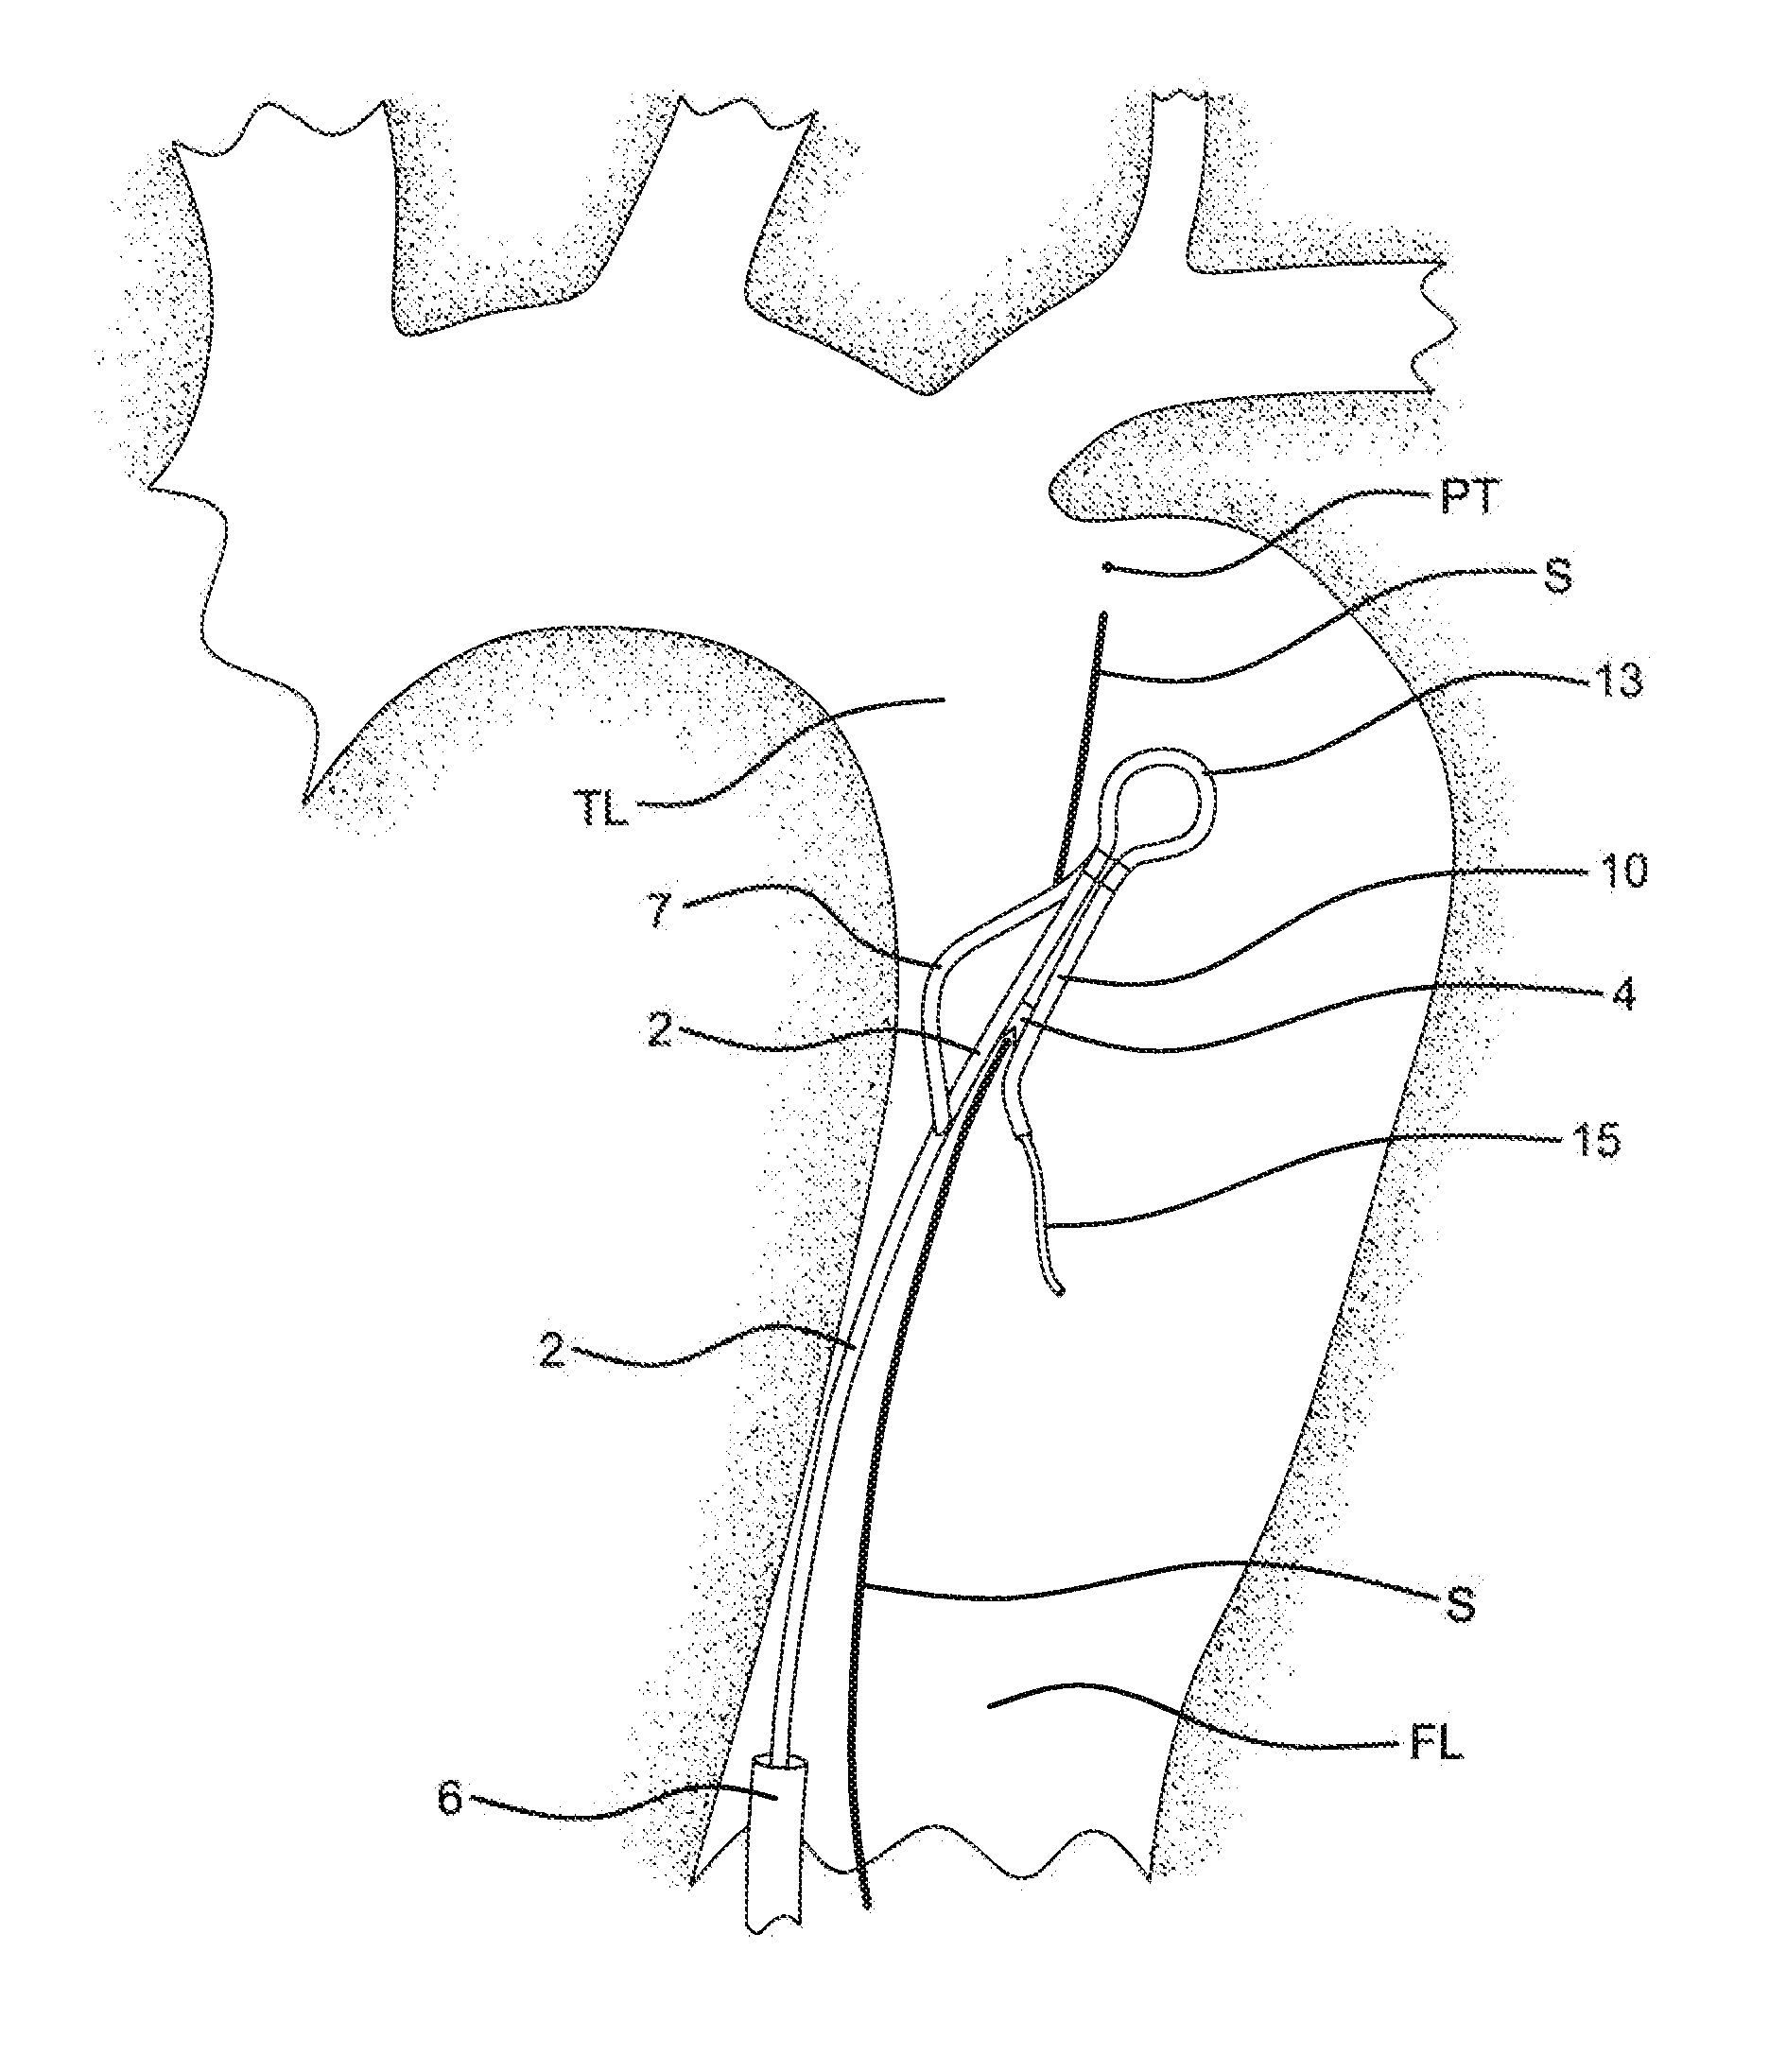 Method of using an aortic dissection septal cutting tool